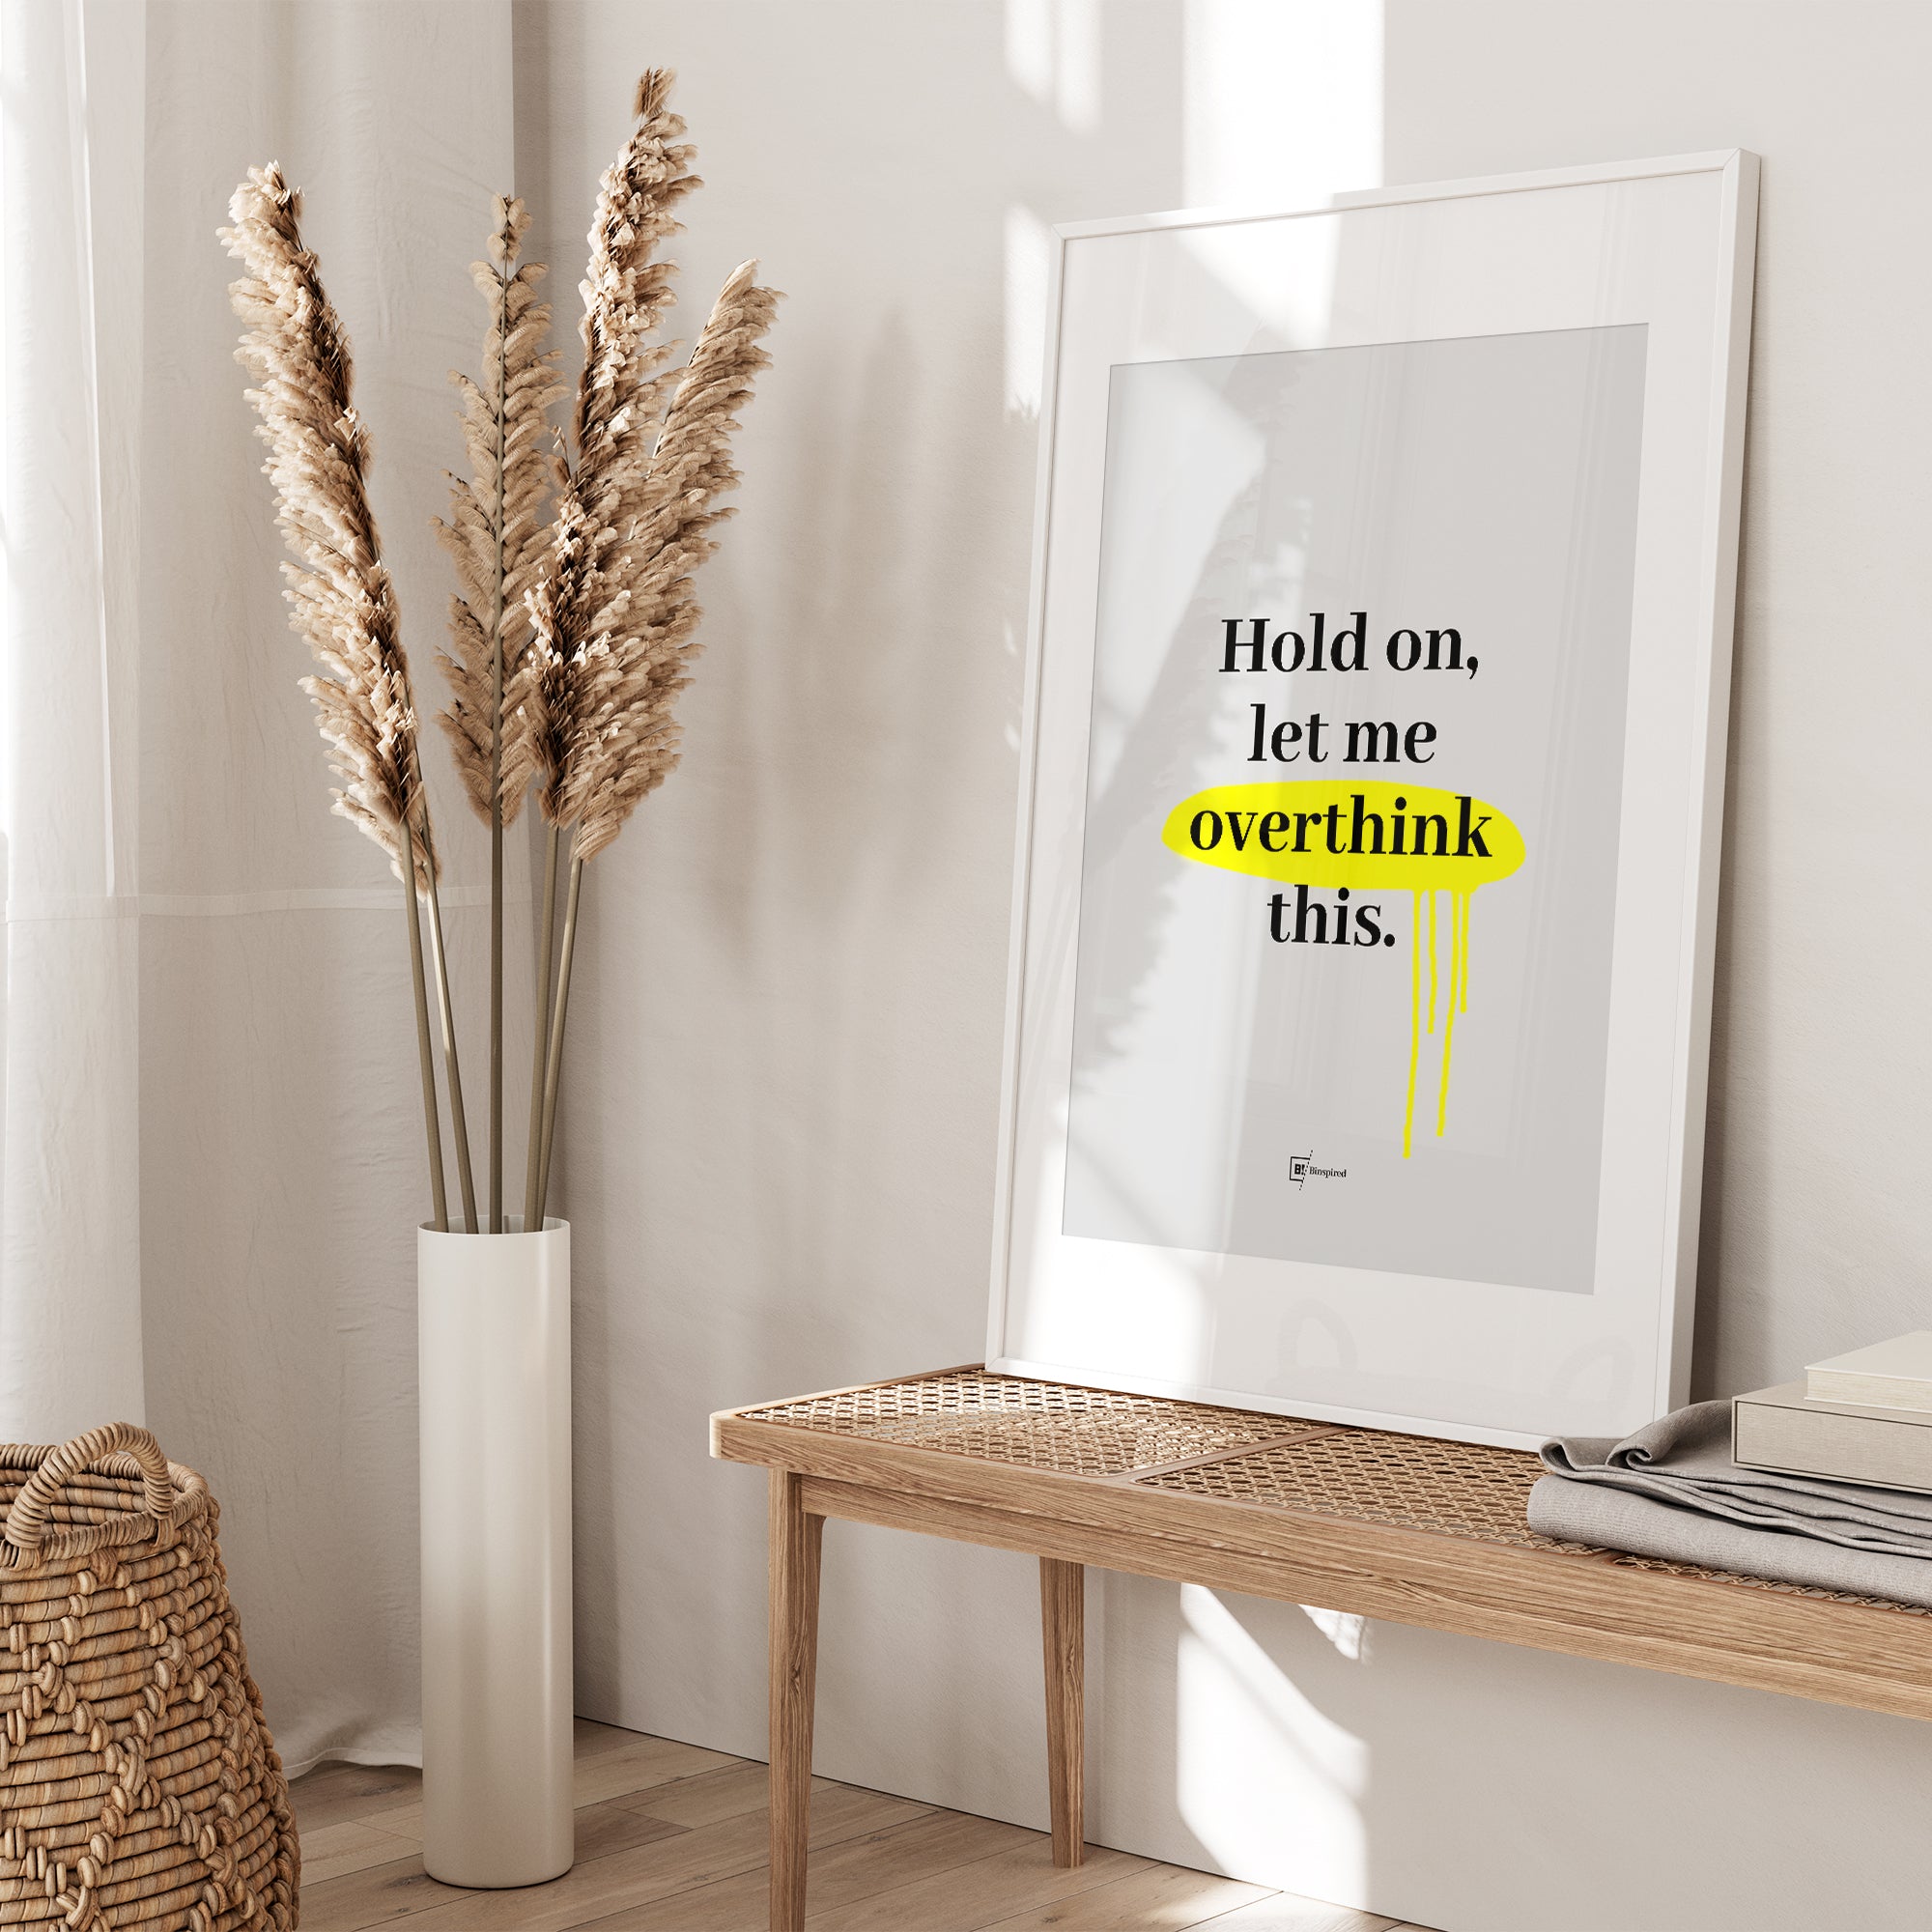 Be inspired by our "Hold on, let me overthink this" quote art print! This artwork was printed using the giclée process on archival acid-free paper and is presented in a white frame with passe-partout that captures its timeless beauty in every detail.